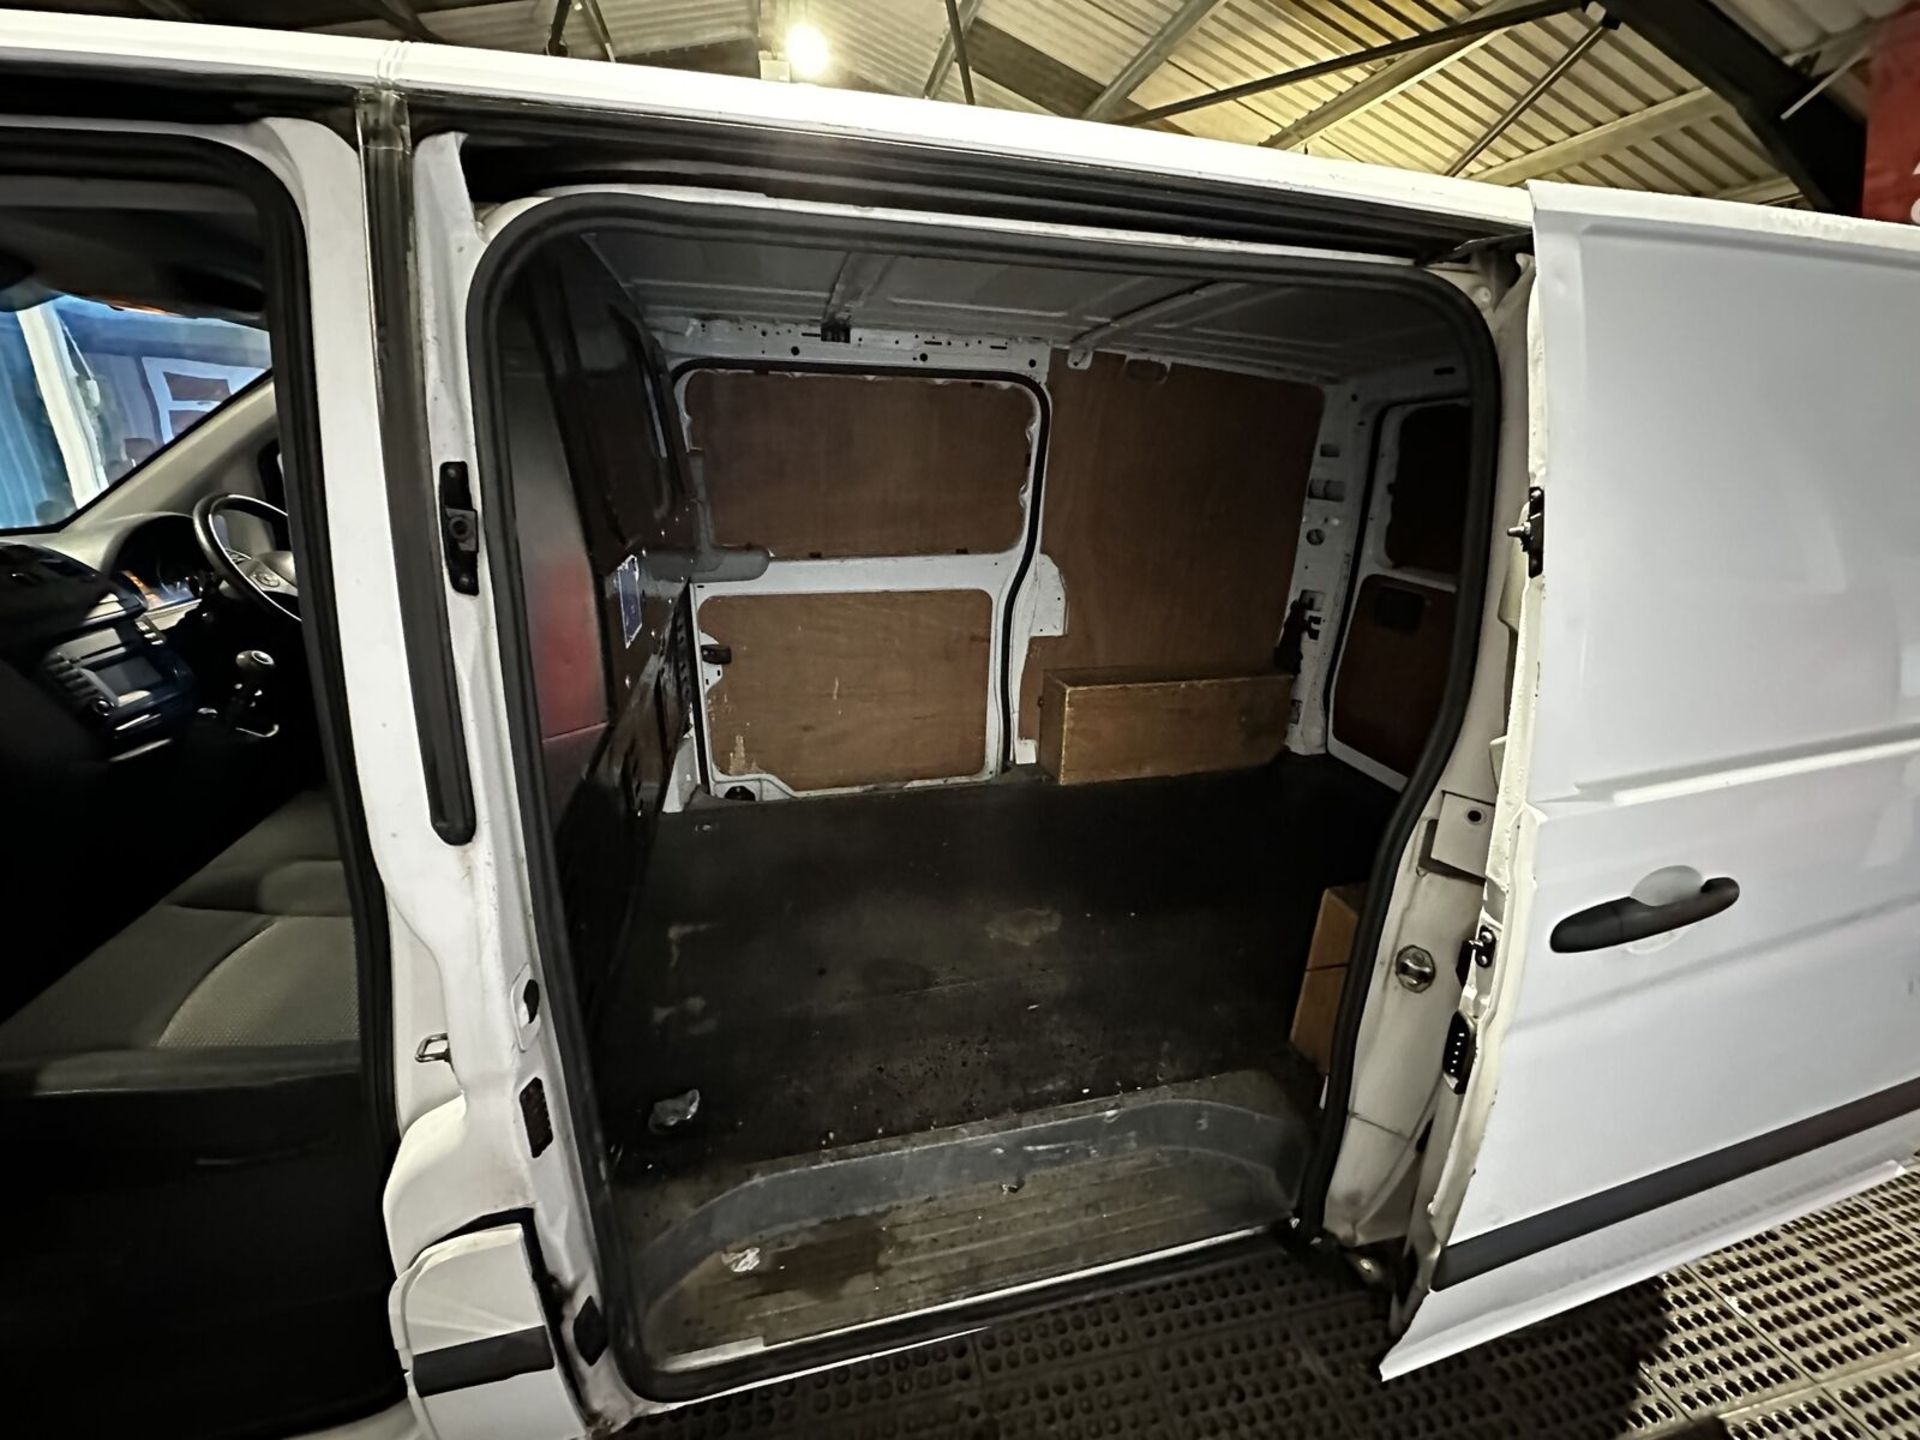 63 PLATE MERCEDES-BENZ VITO LONG DIESEL: READY FOR ACTION >>--NO VAT ON HAMMER--<< - Image 12 of 12